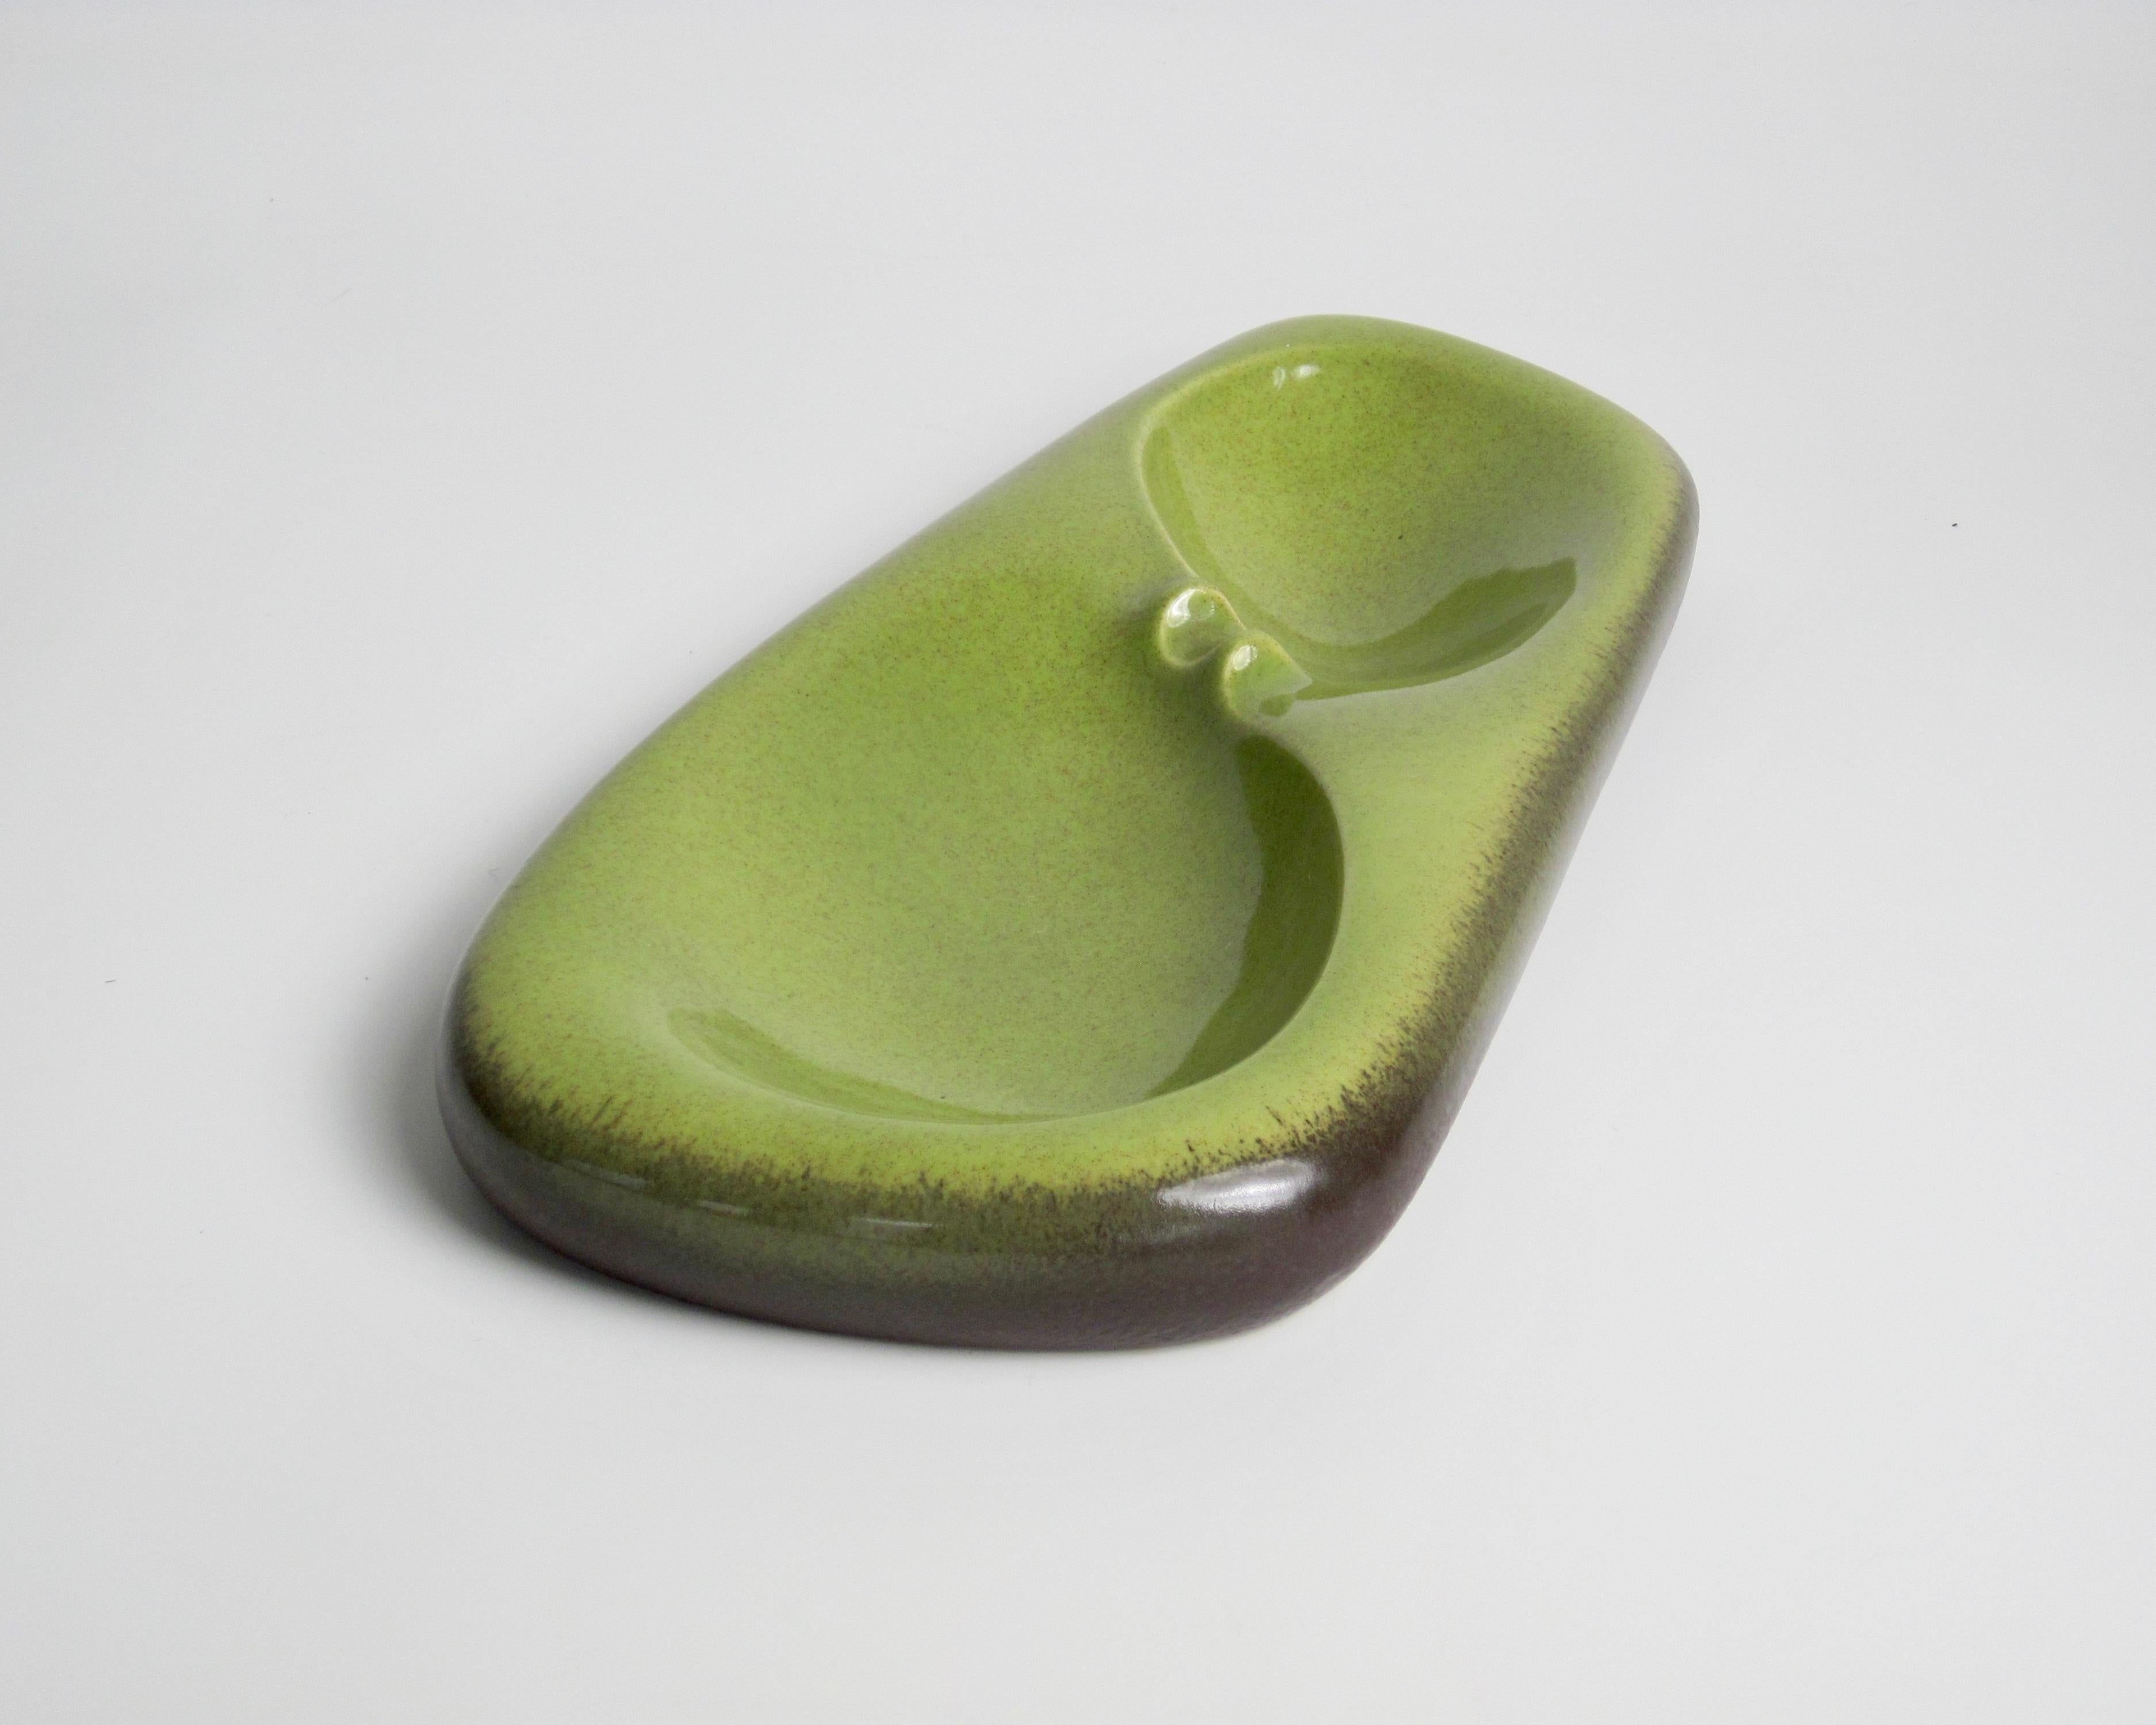 A green and brown biomorphic ashtray sculpture designed by Arno Scheiding. 
Signed Arno Scheiding T-704